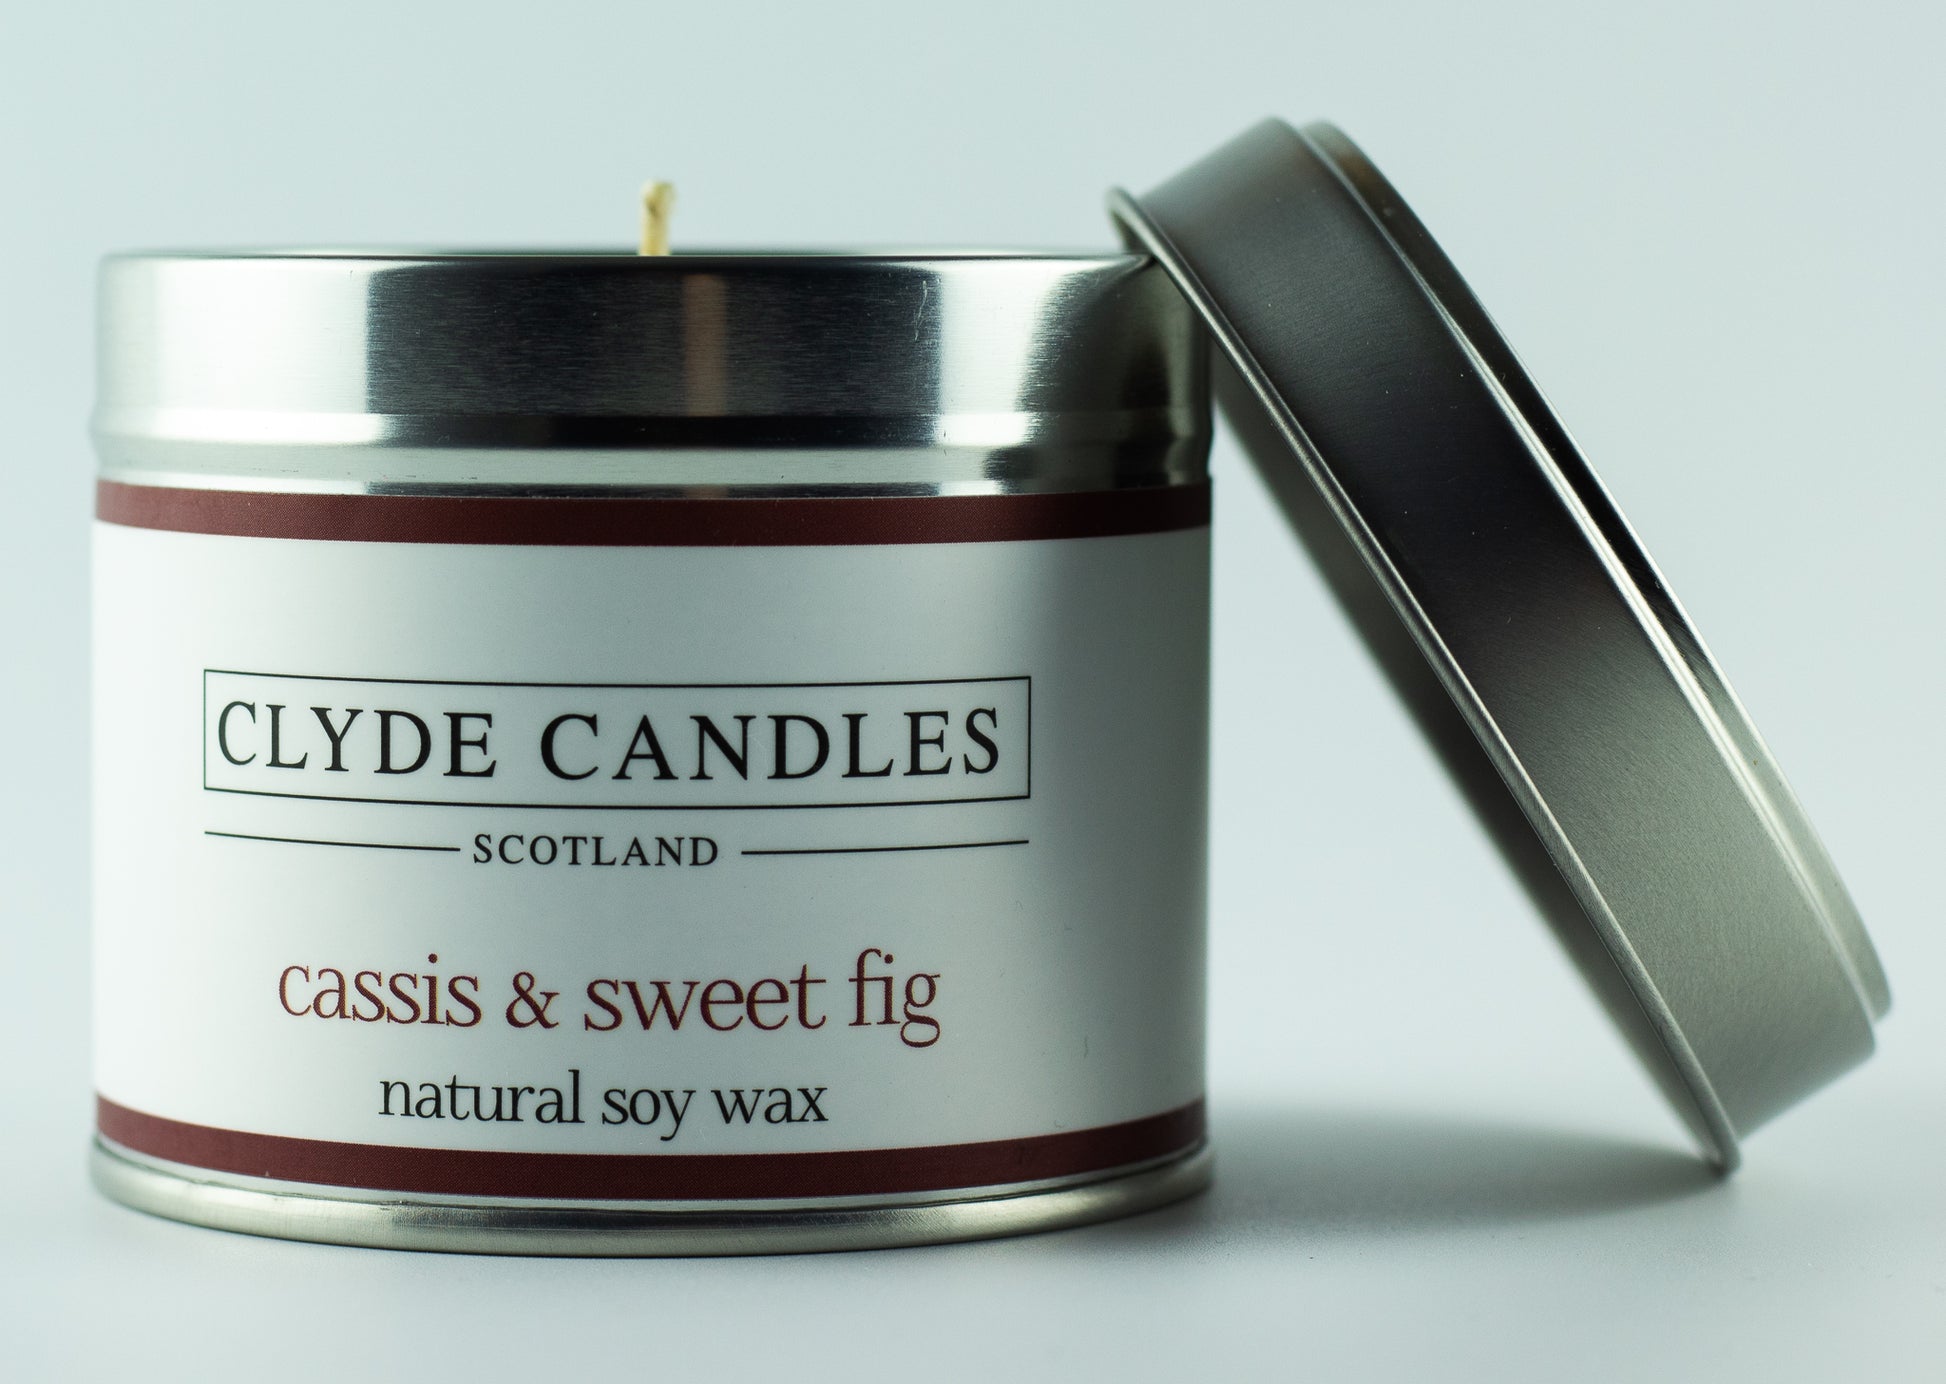 Cassis & Sweet Fig Candle Tin Natural Soy wax, Scottish Luxury Candles Gifts, Clyde Candles